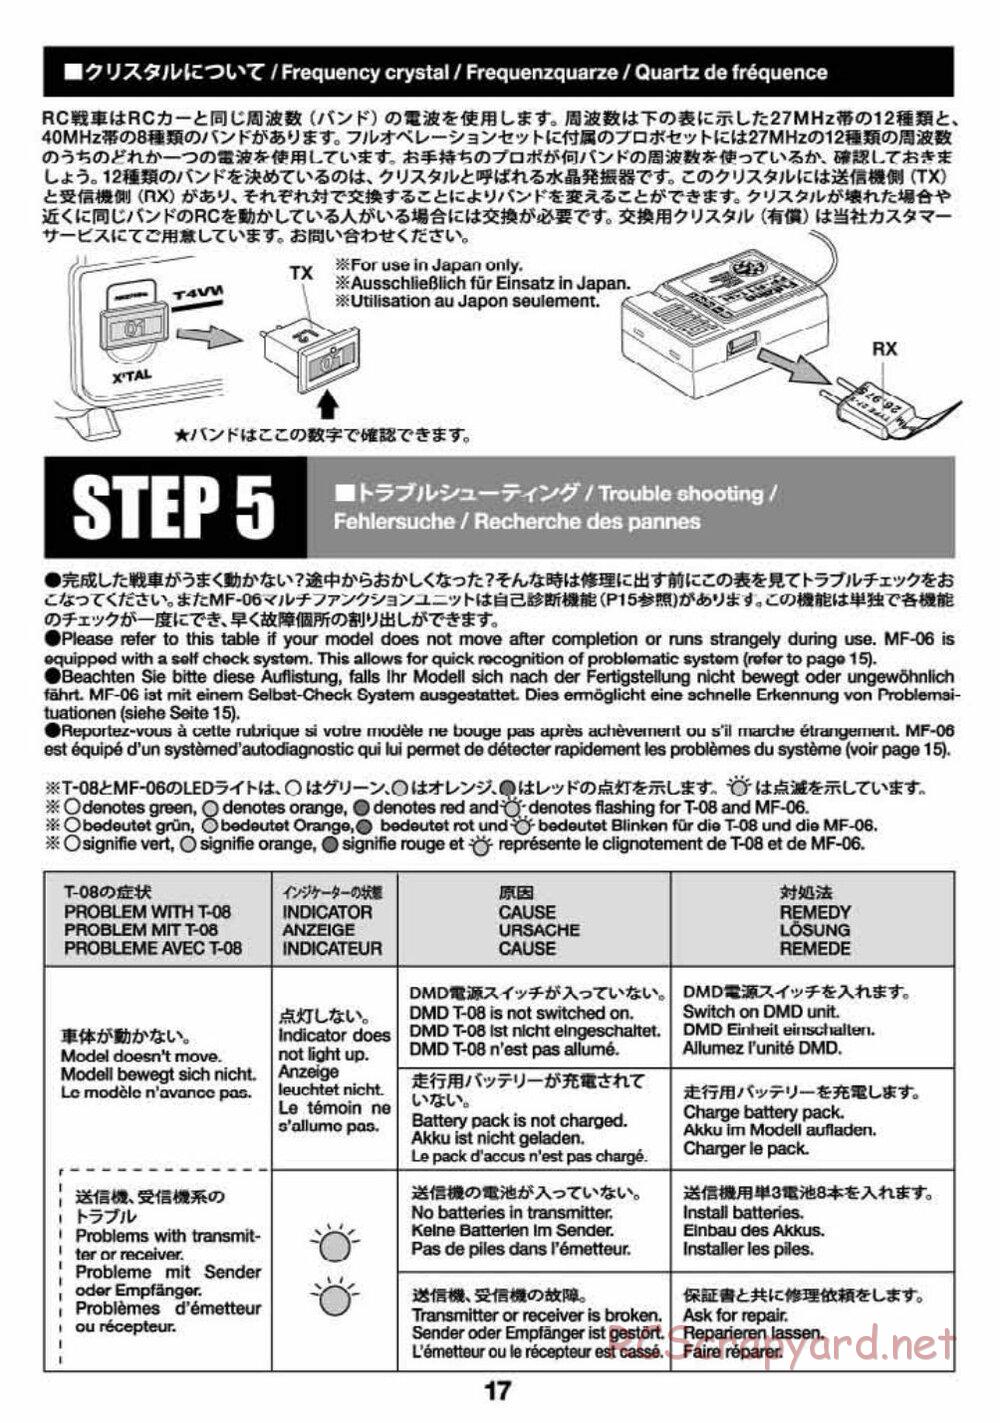 Tamiya - Russian Heavy Tank KV-2 Gigant - 1/16 Scale Chassis - Operation Manual - Page 17